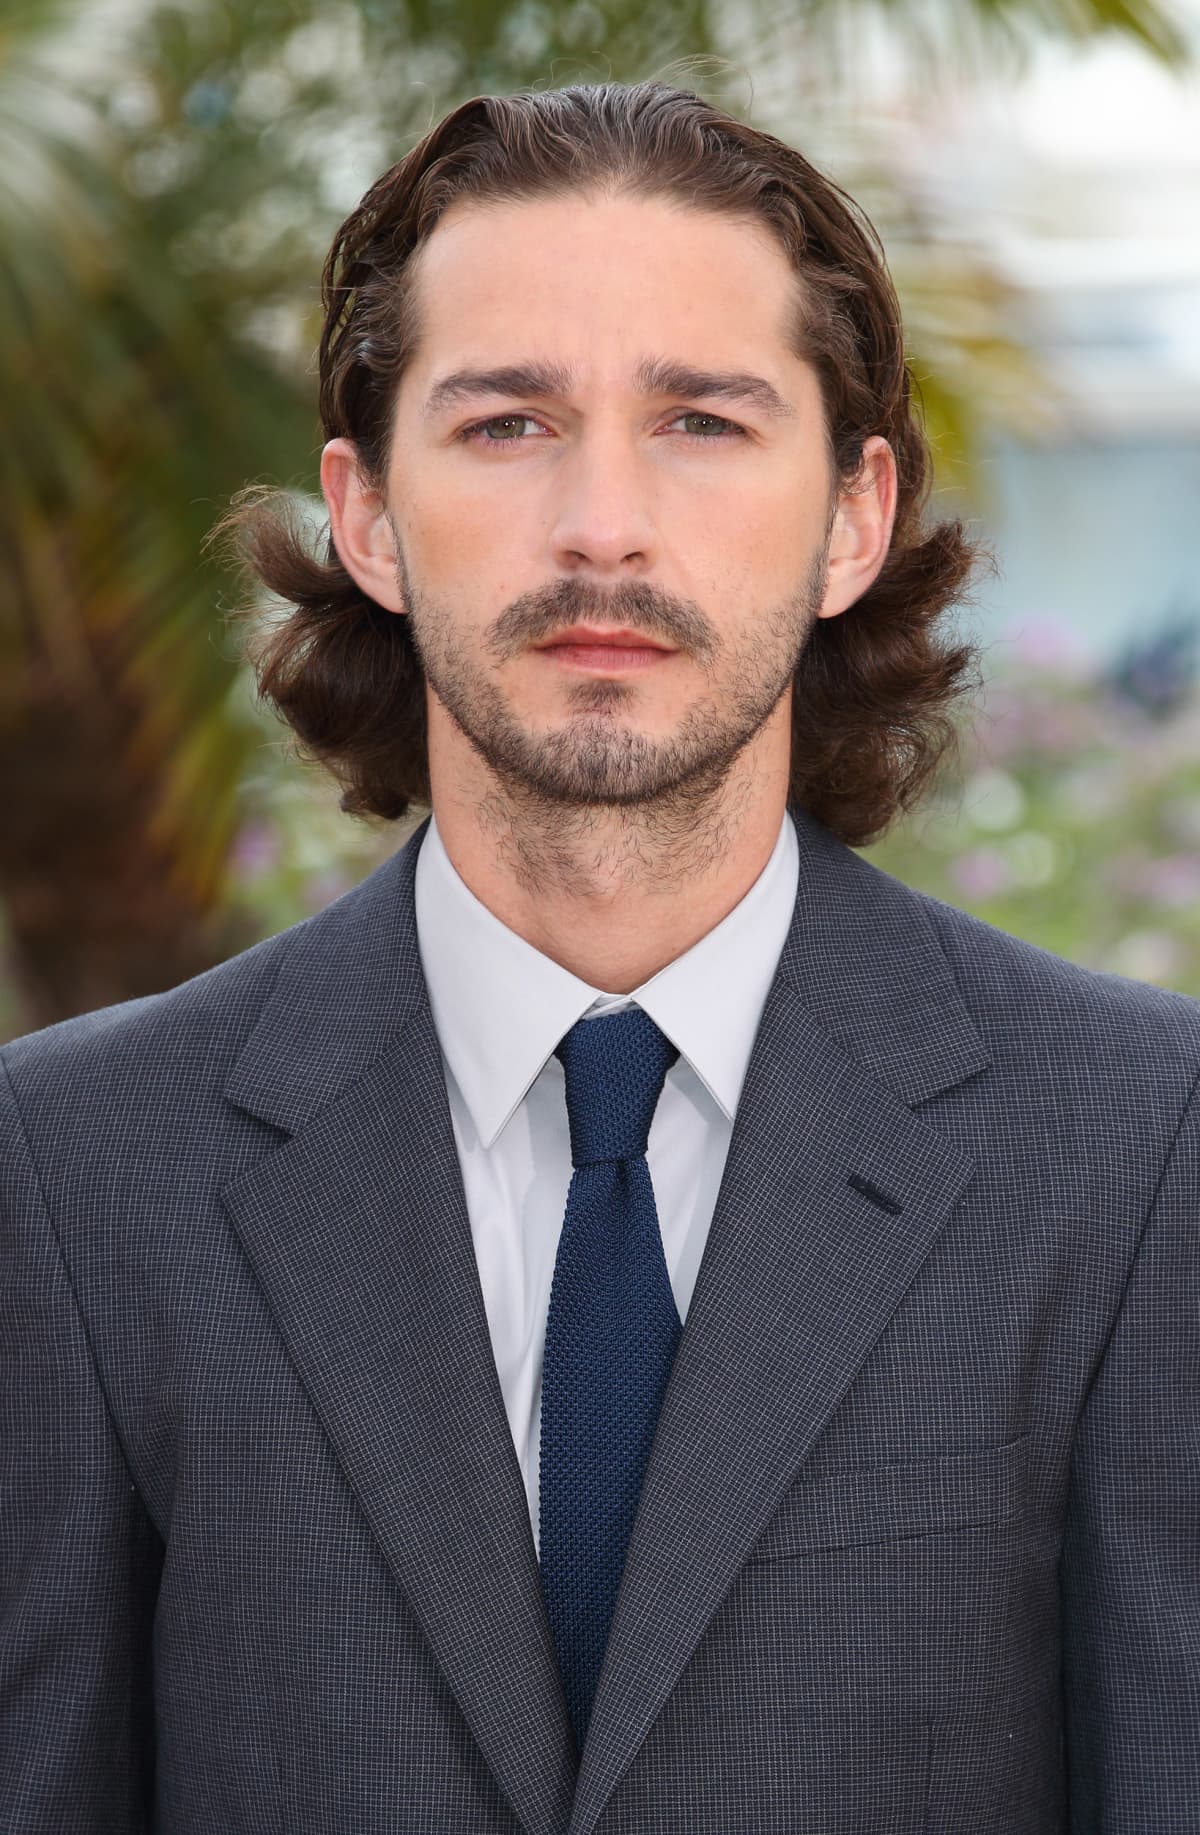 LONDON, ENGLAND - OCTOBER 03: Shia LaBeouf attends "The Peanut Butter Falcon" UK Premiere during 63rd BFI London Film Festival at the Embankment Gardens Cinema on October 03, 2019 in London, England. (Photo by Mike Marsland/WireImage)